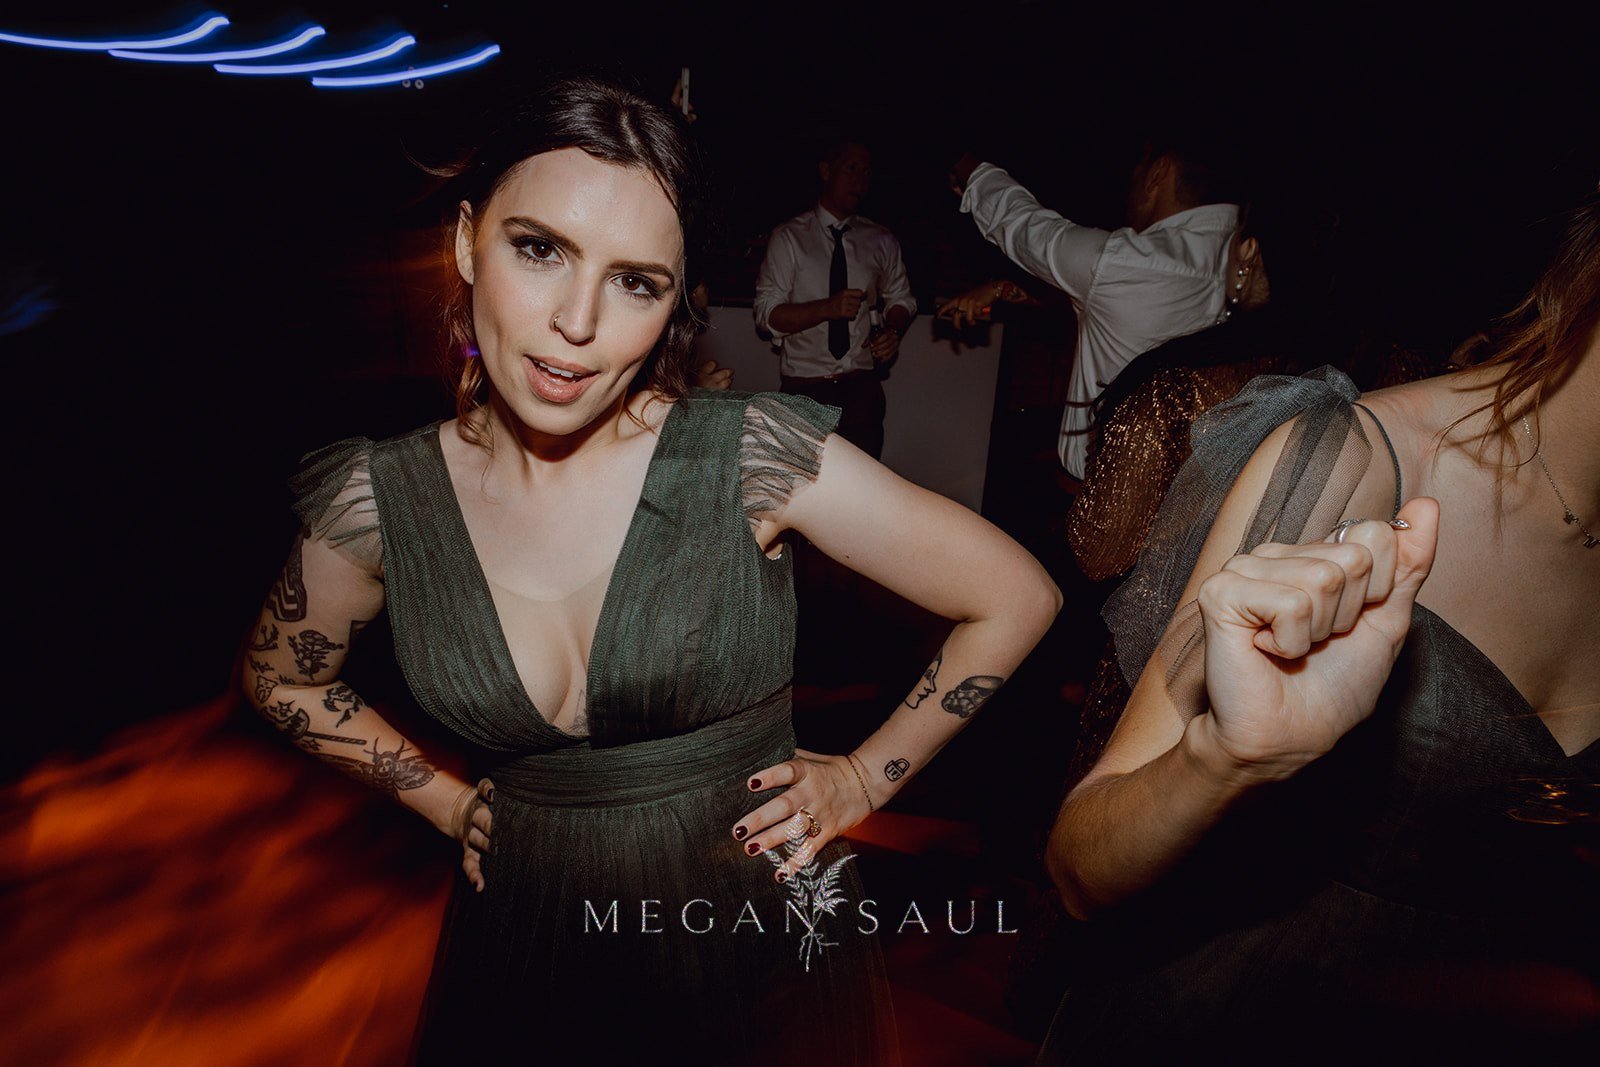 CHICAGO-WEDDING-PHOTOGRAPHY-BY-ARTISTS-AND-STORIES-BY-MEGAN-SAUL-RECEPTION (183 of 211)_websize.jpg